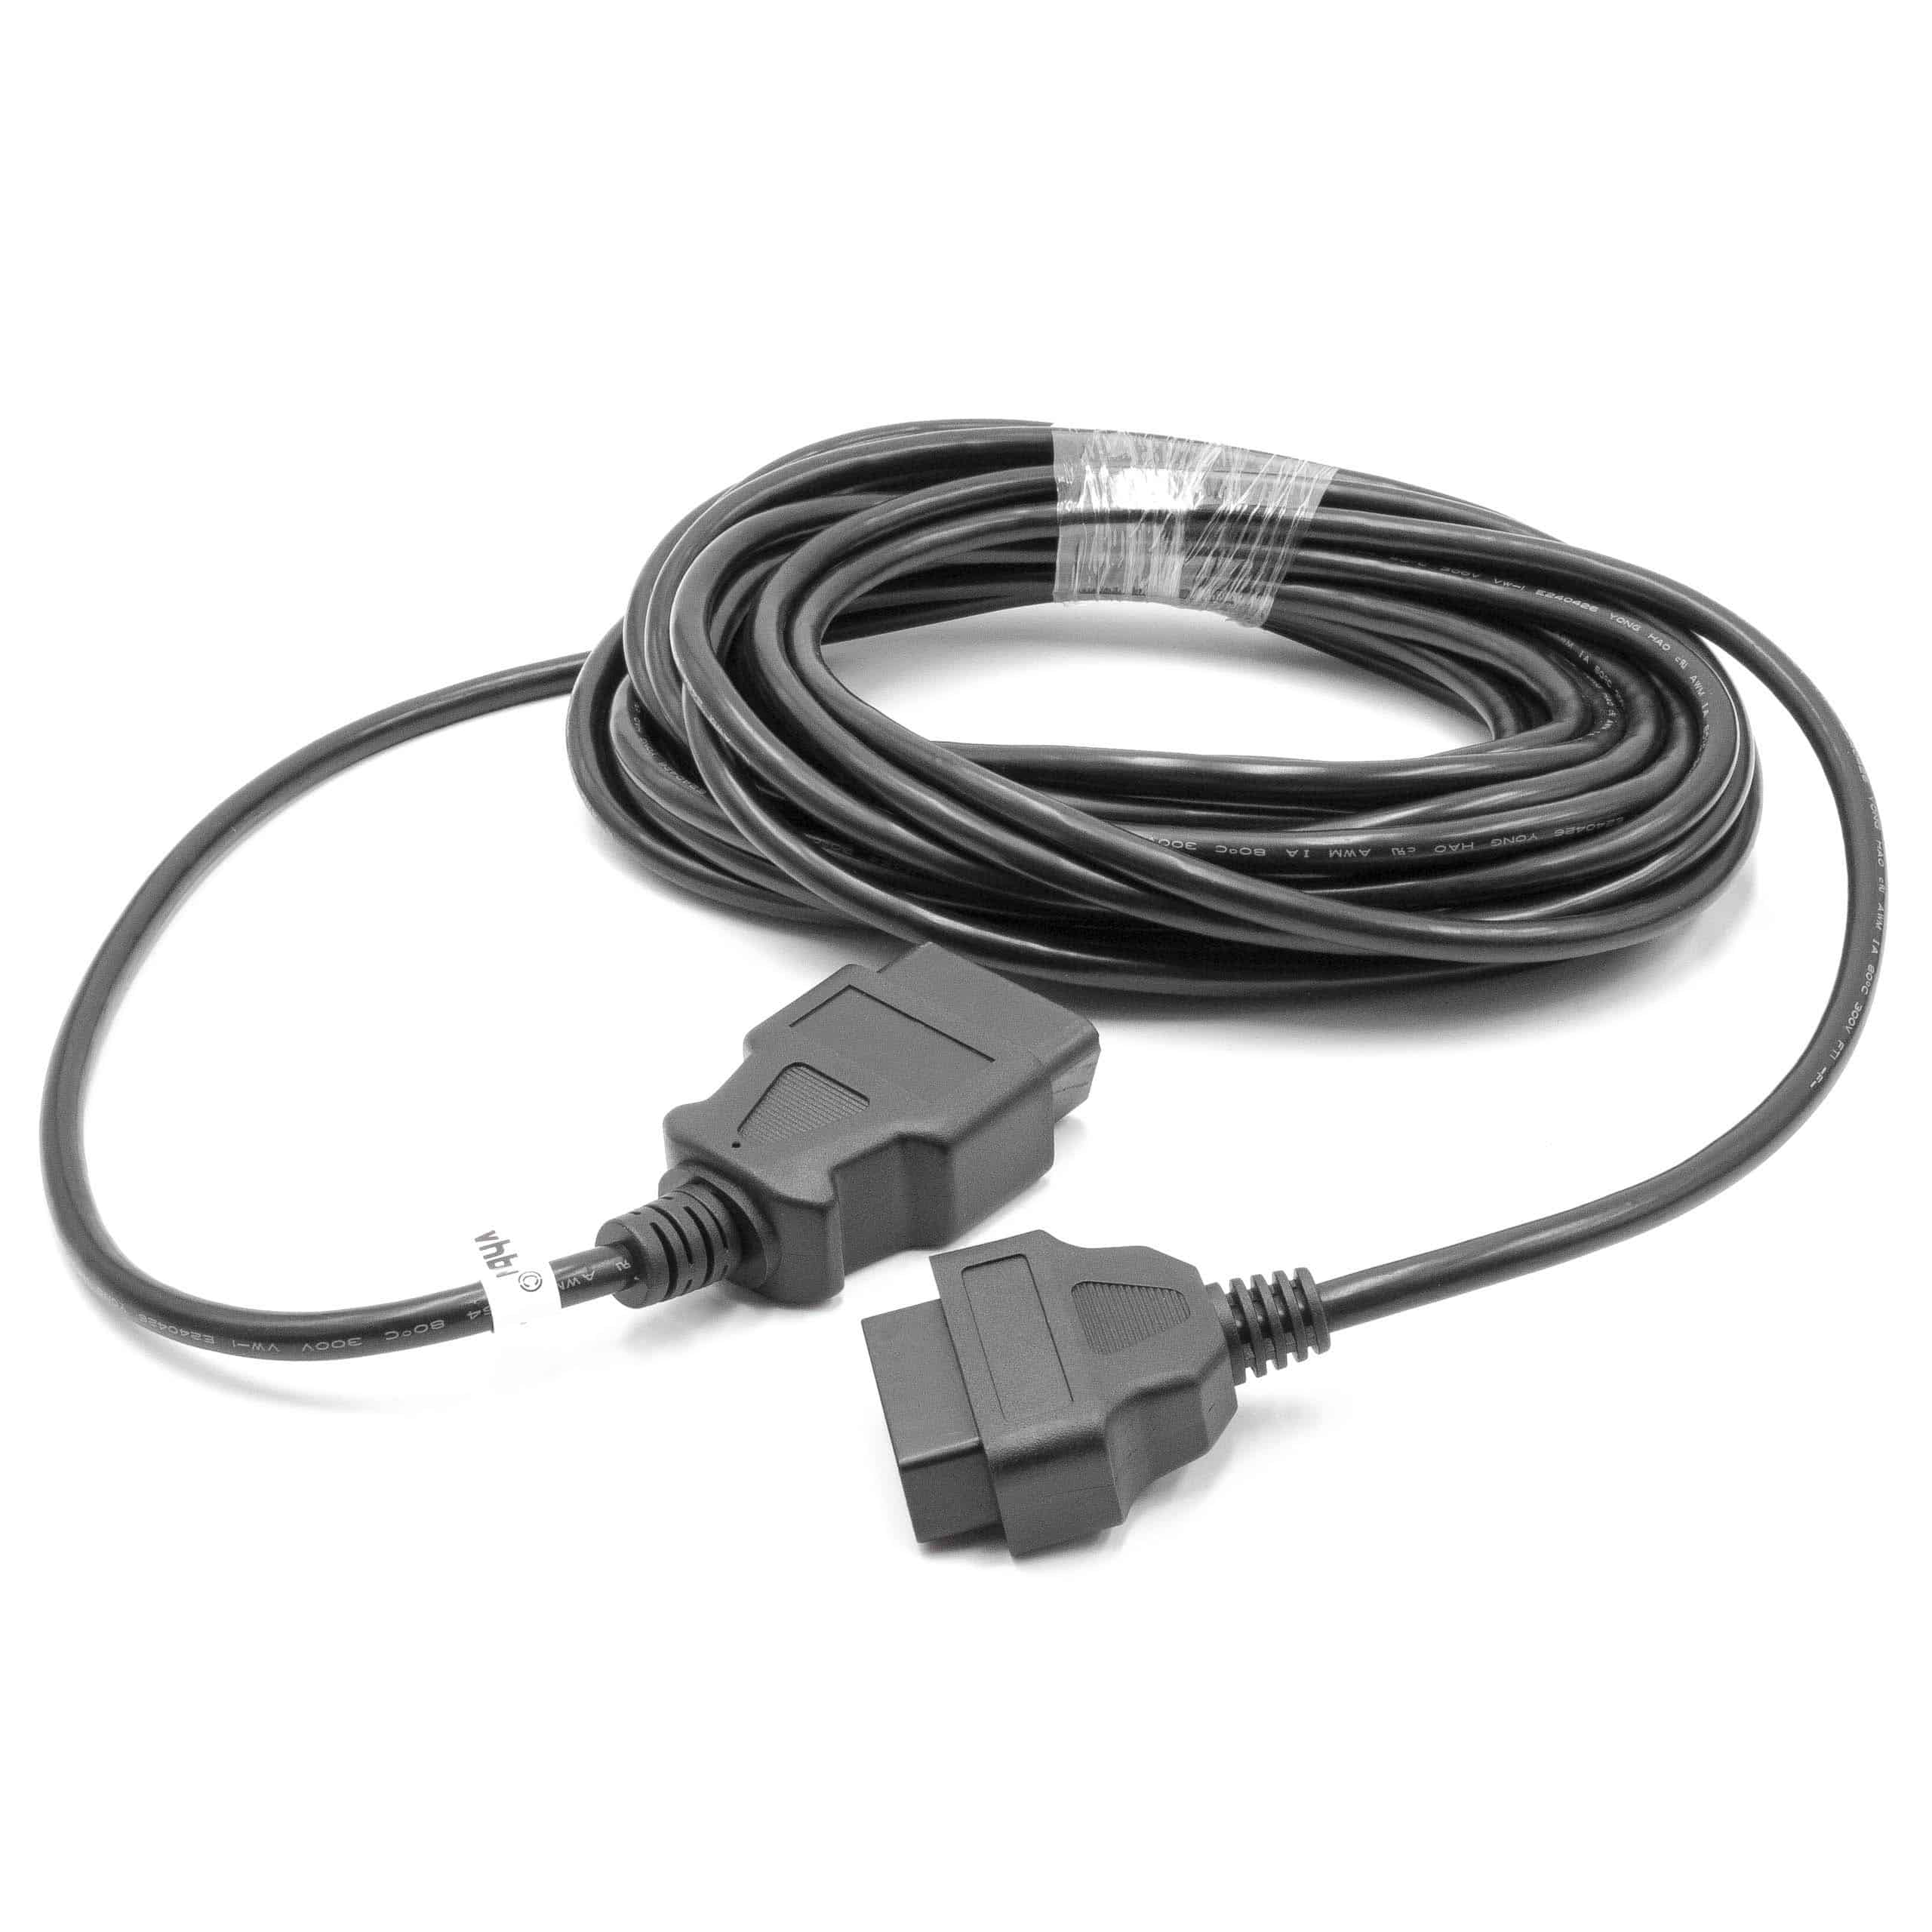 vhbw OBD2 Extension Cable 16 Pin (f) to 16 Pin (m) for Vehicle - 1000 cm